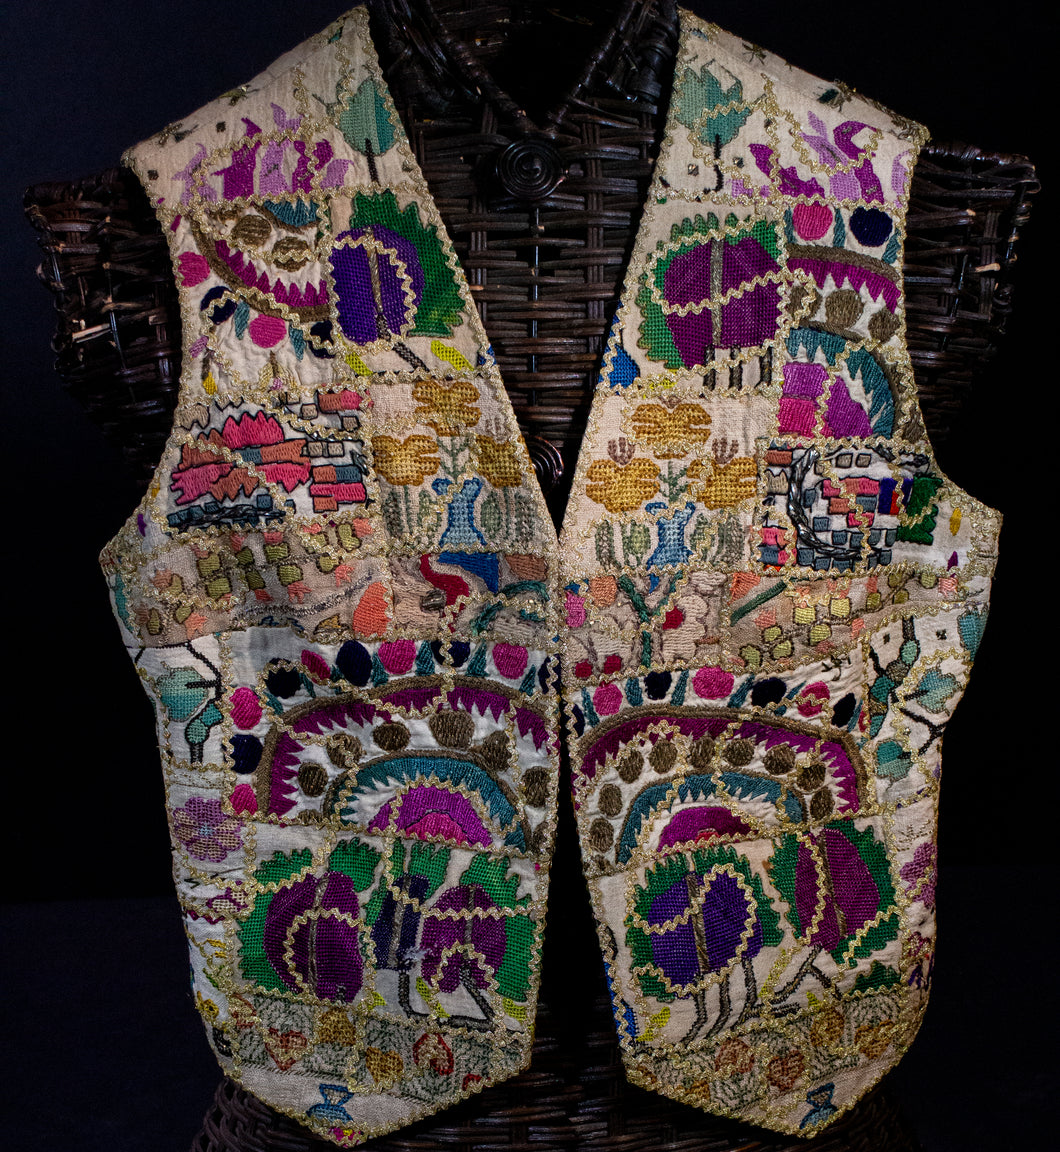 Greek Island Vest with Needlepoint Embroidery